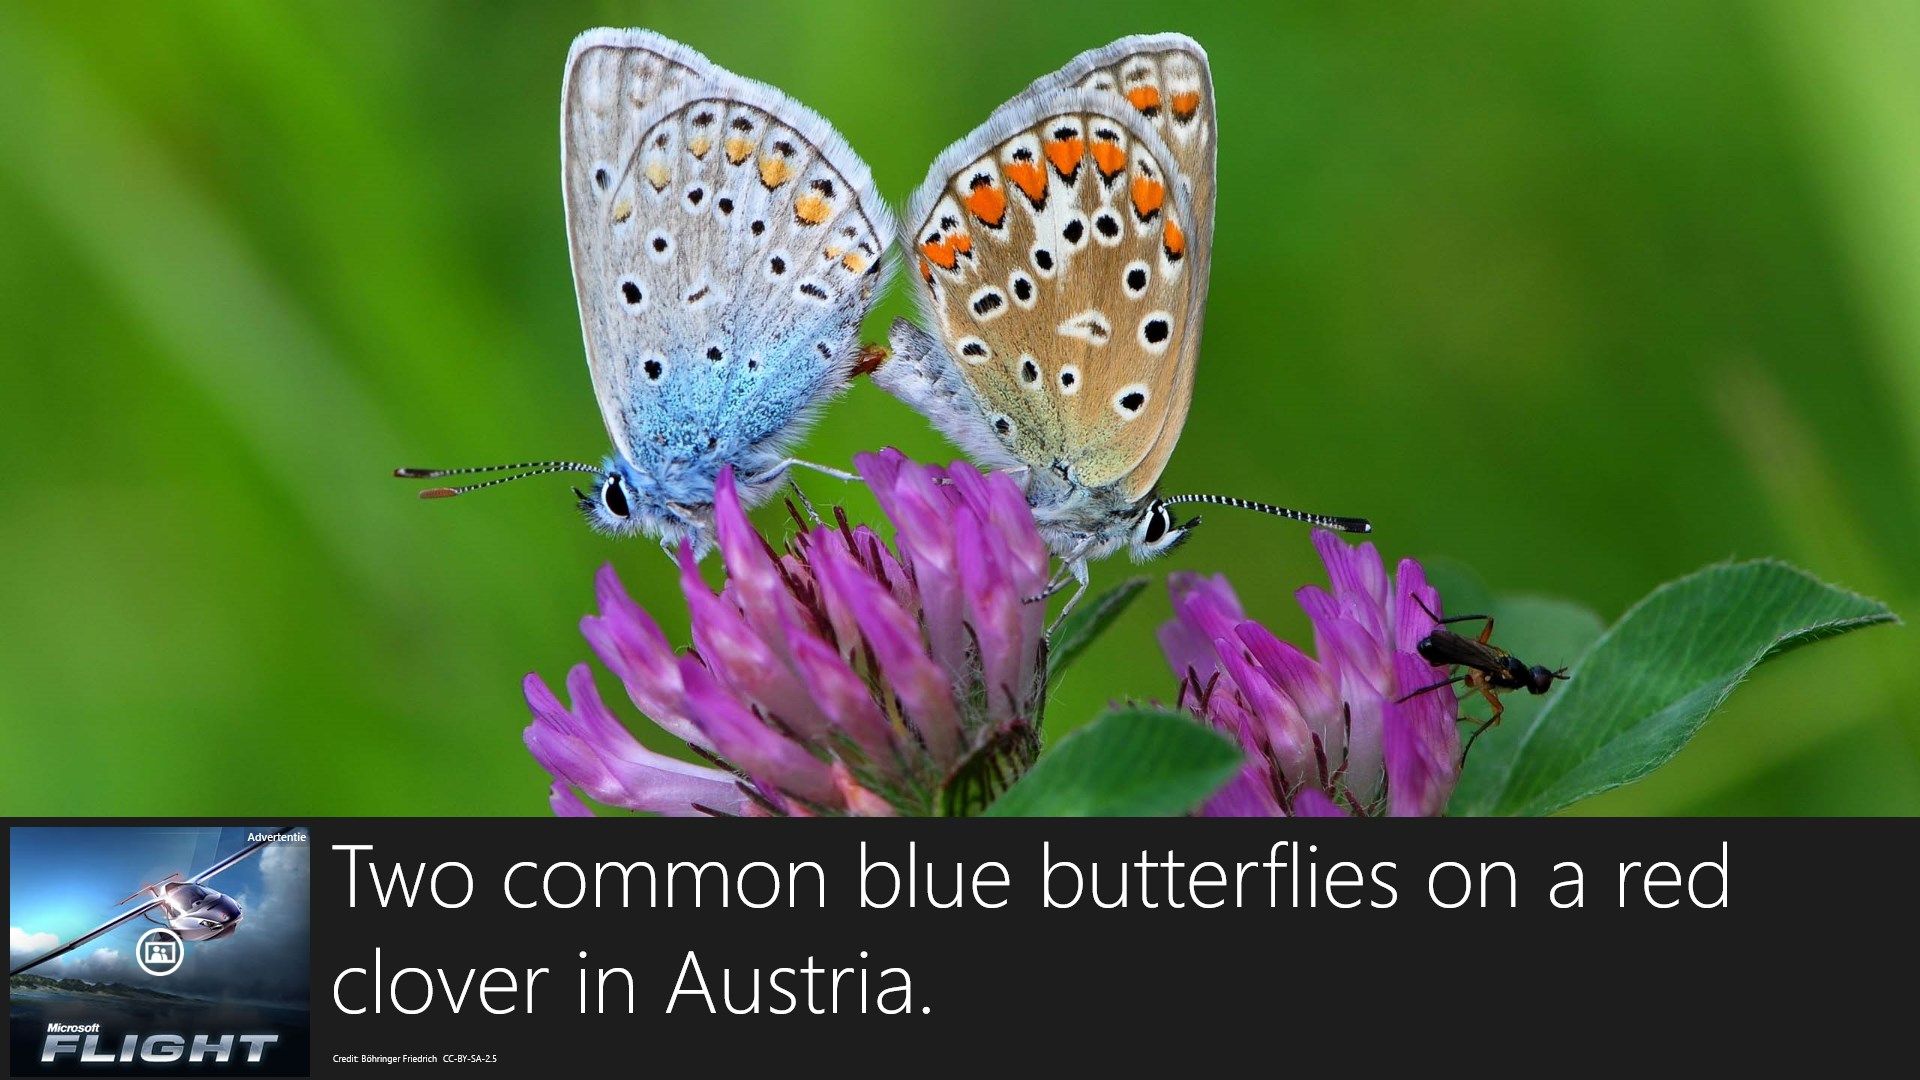 Amazing butterflies from all over the world!